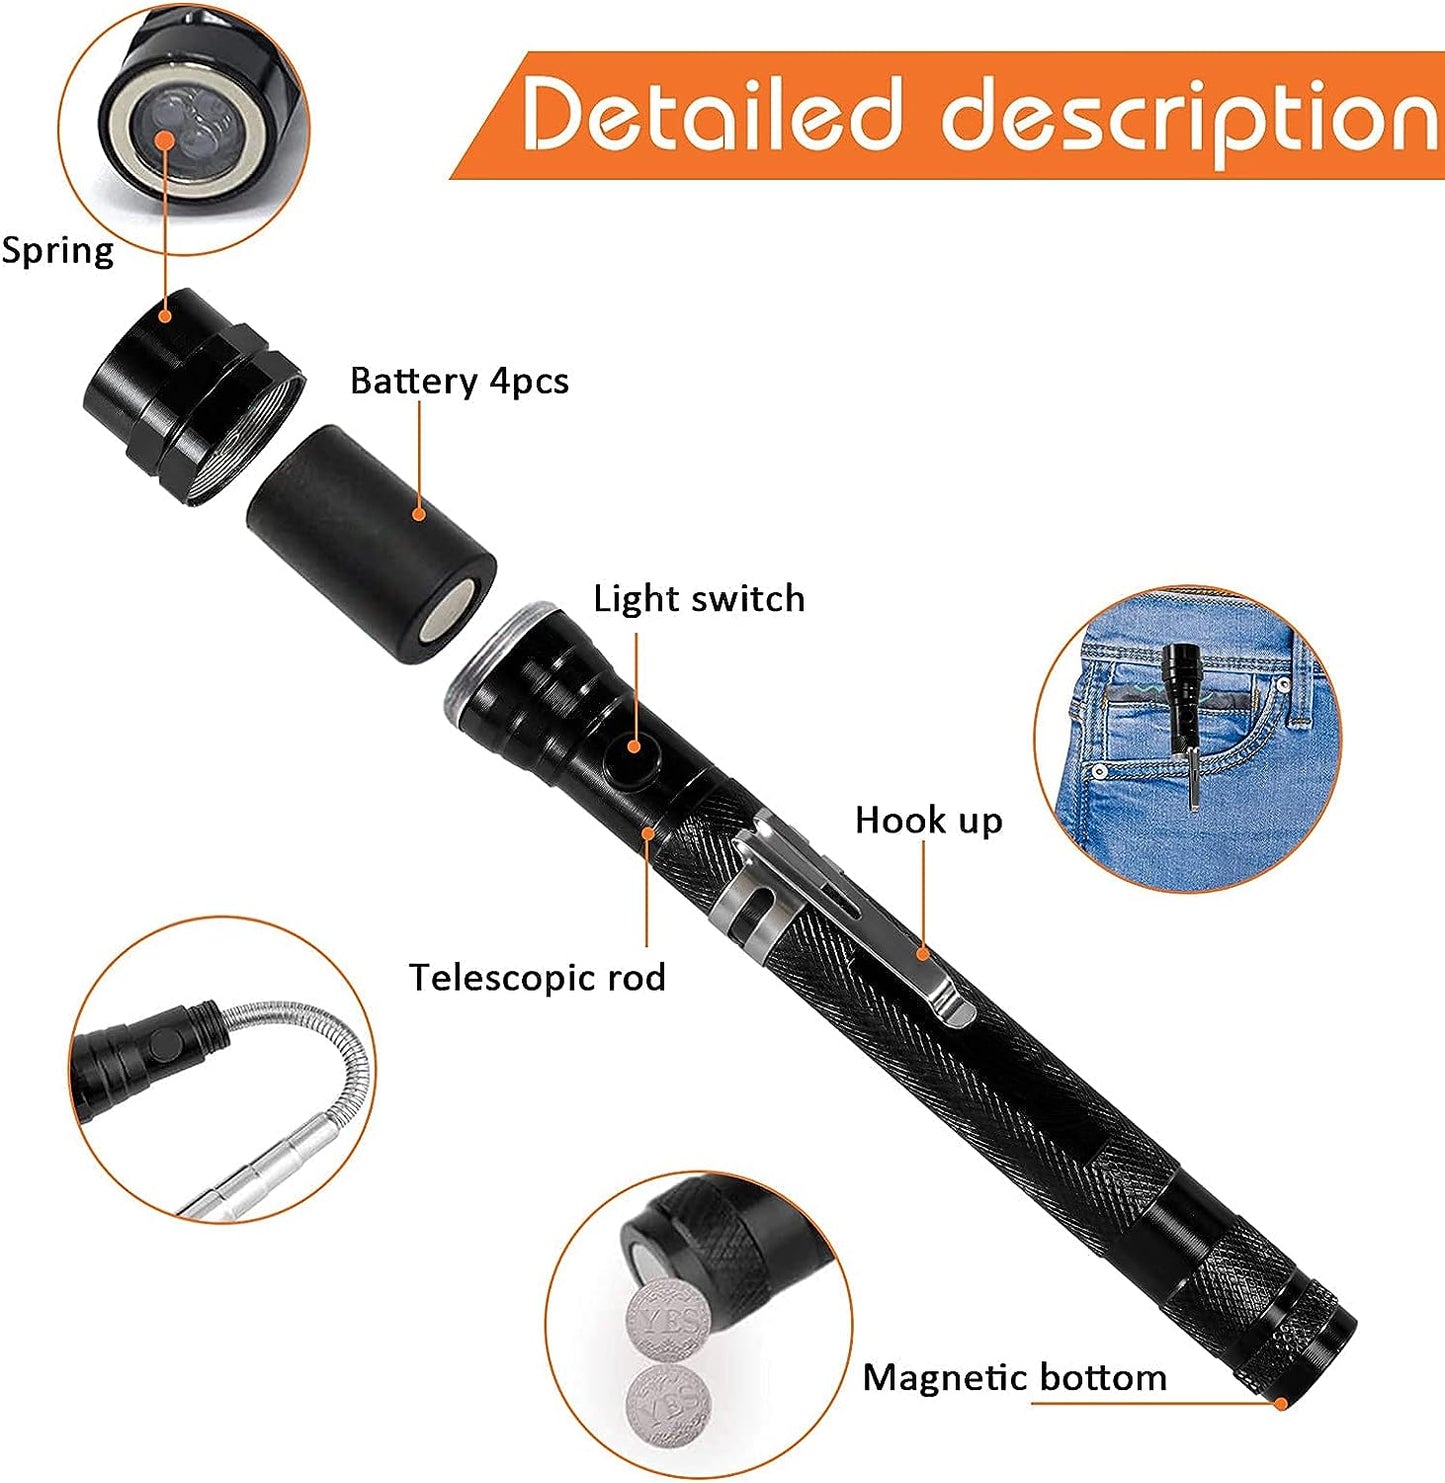 KUCHEY Magnetic Flashlight Pickup Tool - Handy Gadgets with LED and Telescoping Magnet, Thoughtful Gifts for Dads, Men, Husbands - Ideal for Stocking Stuffers, Birthdays, and Christmas